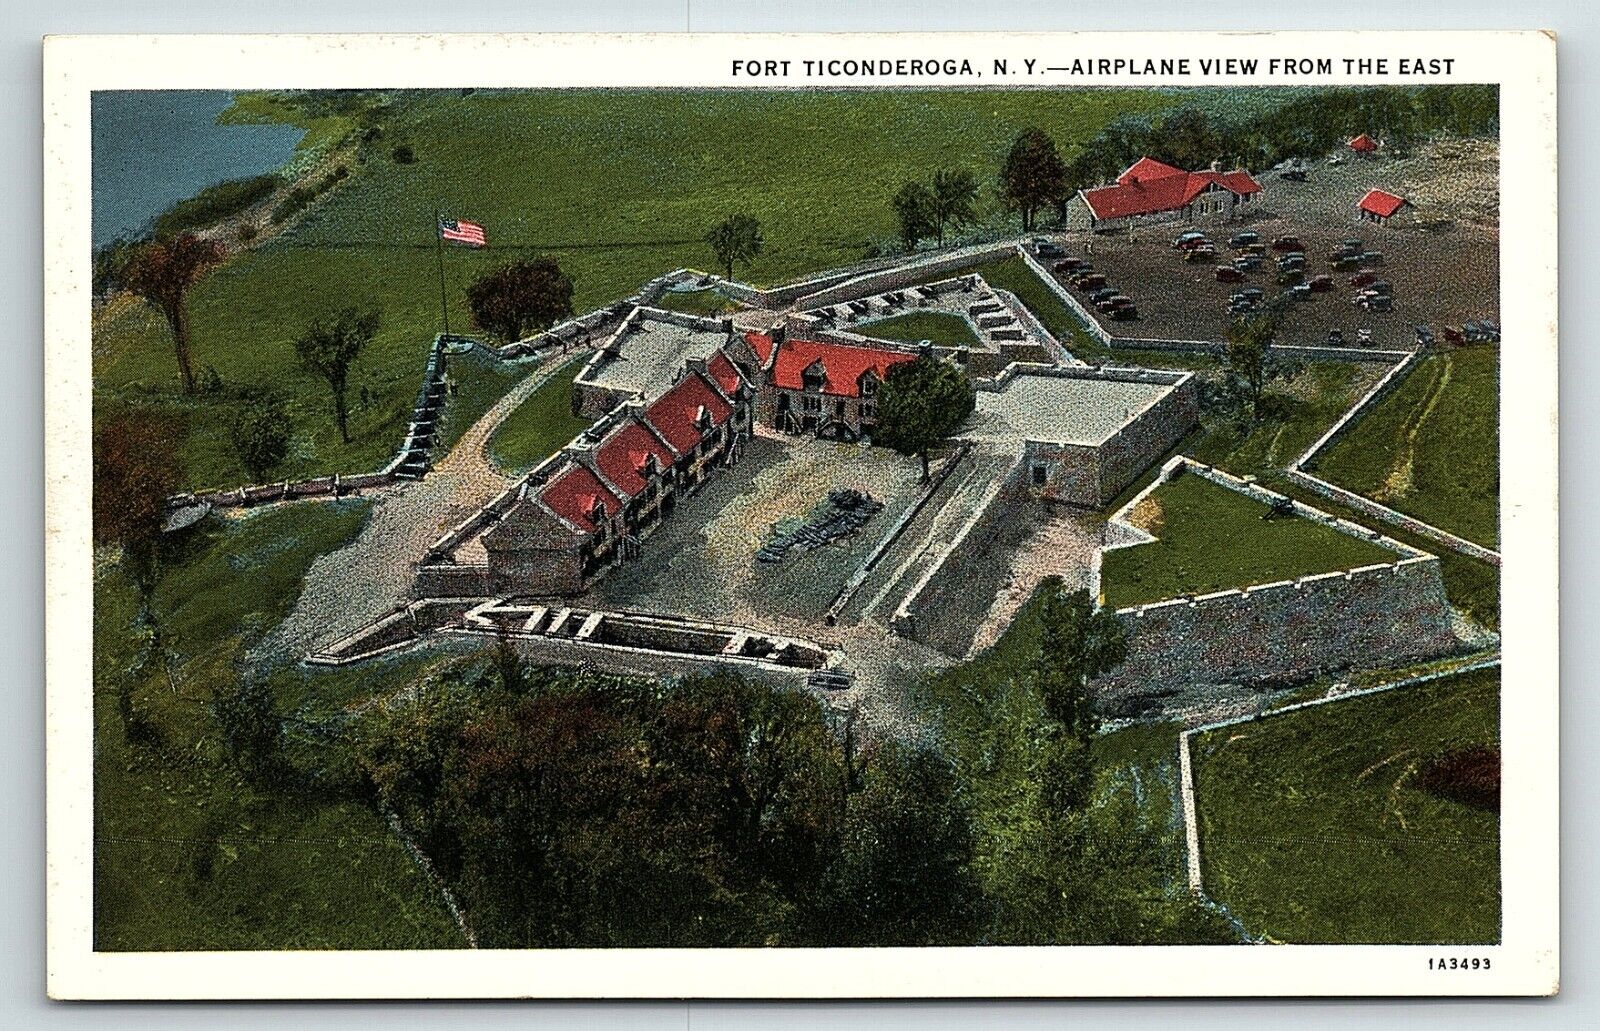 1920s FORT TICONDEROGA NEW YORK NY AIRPLANE VIEW FROM THE EAST POSTCARD P2599